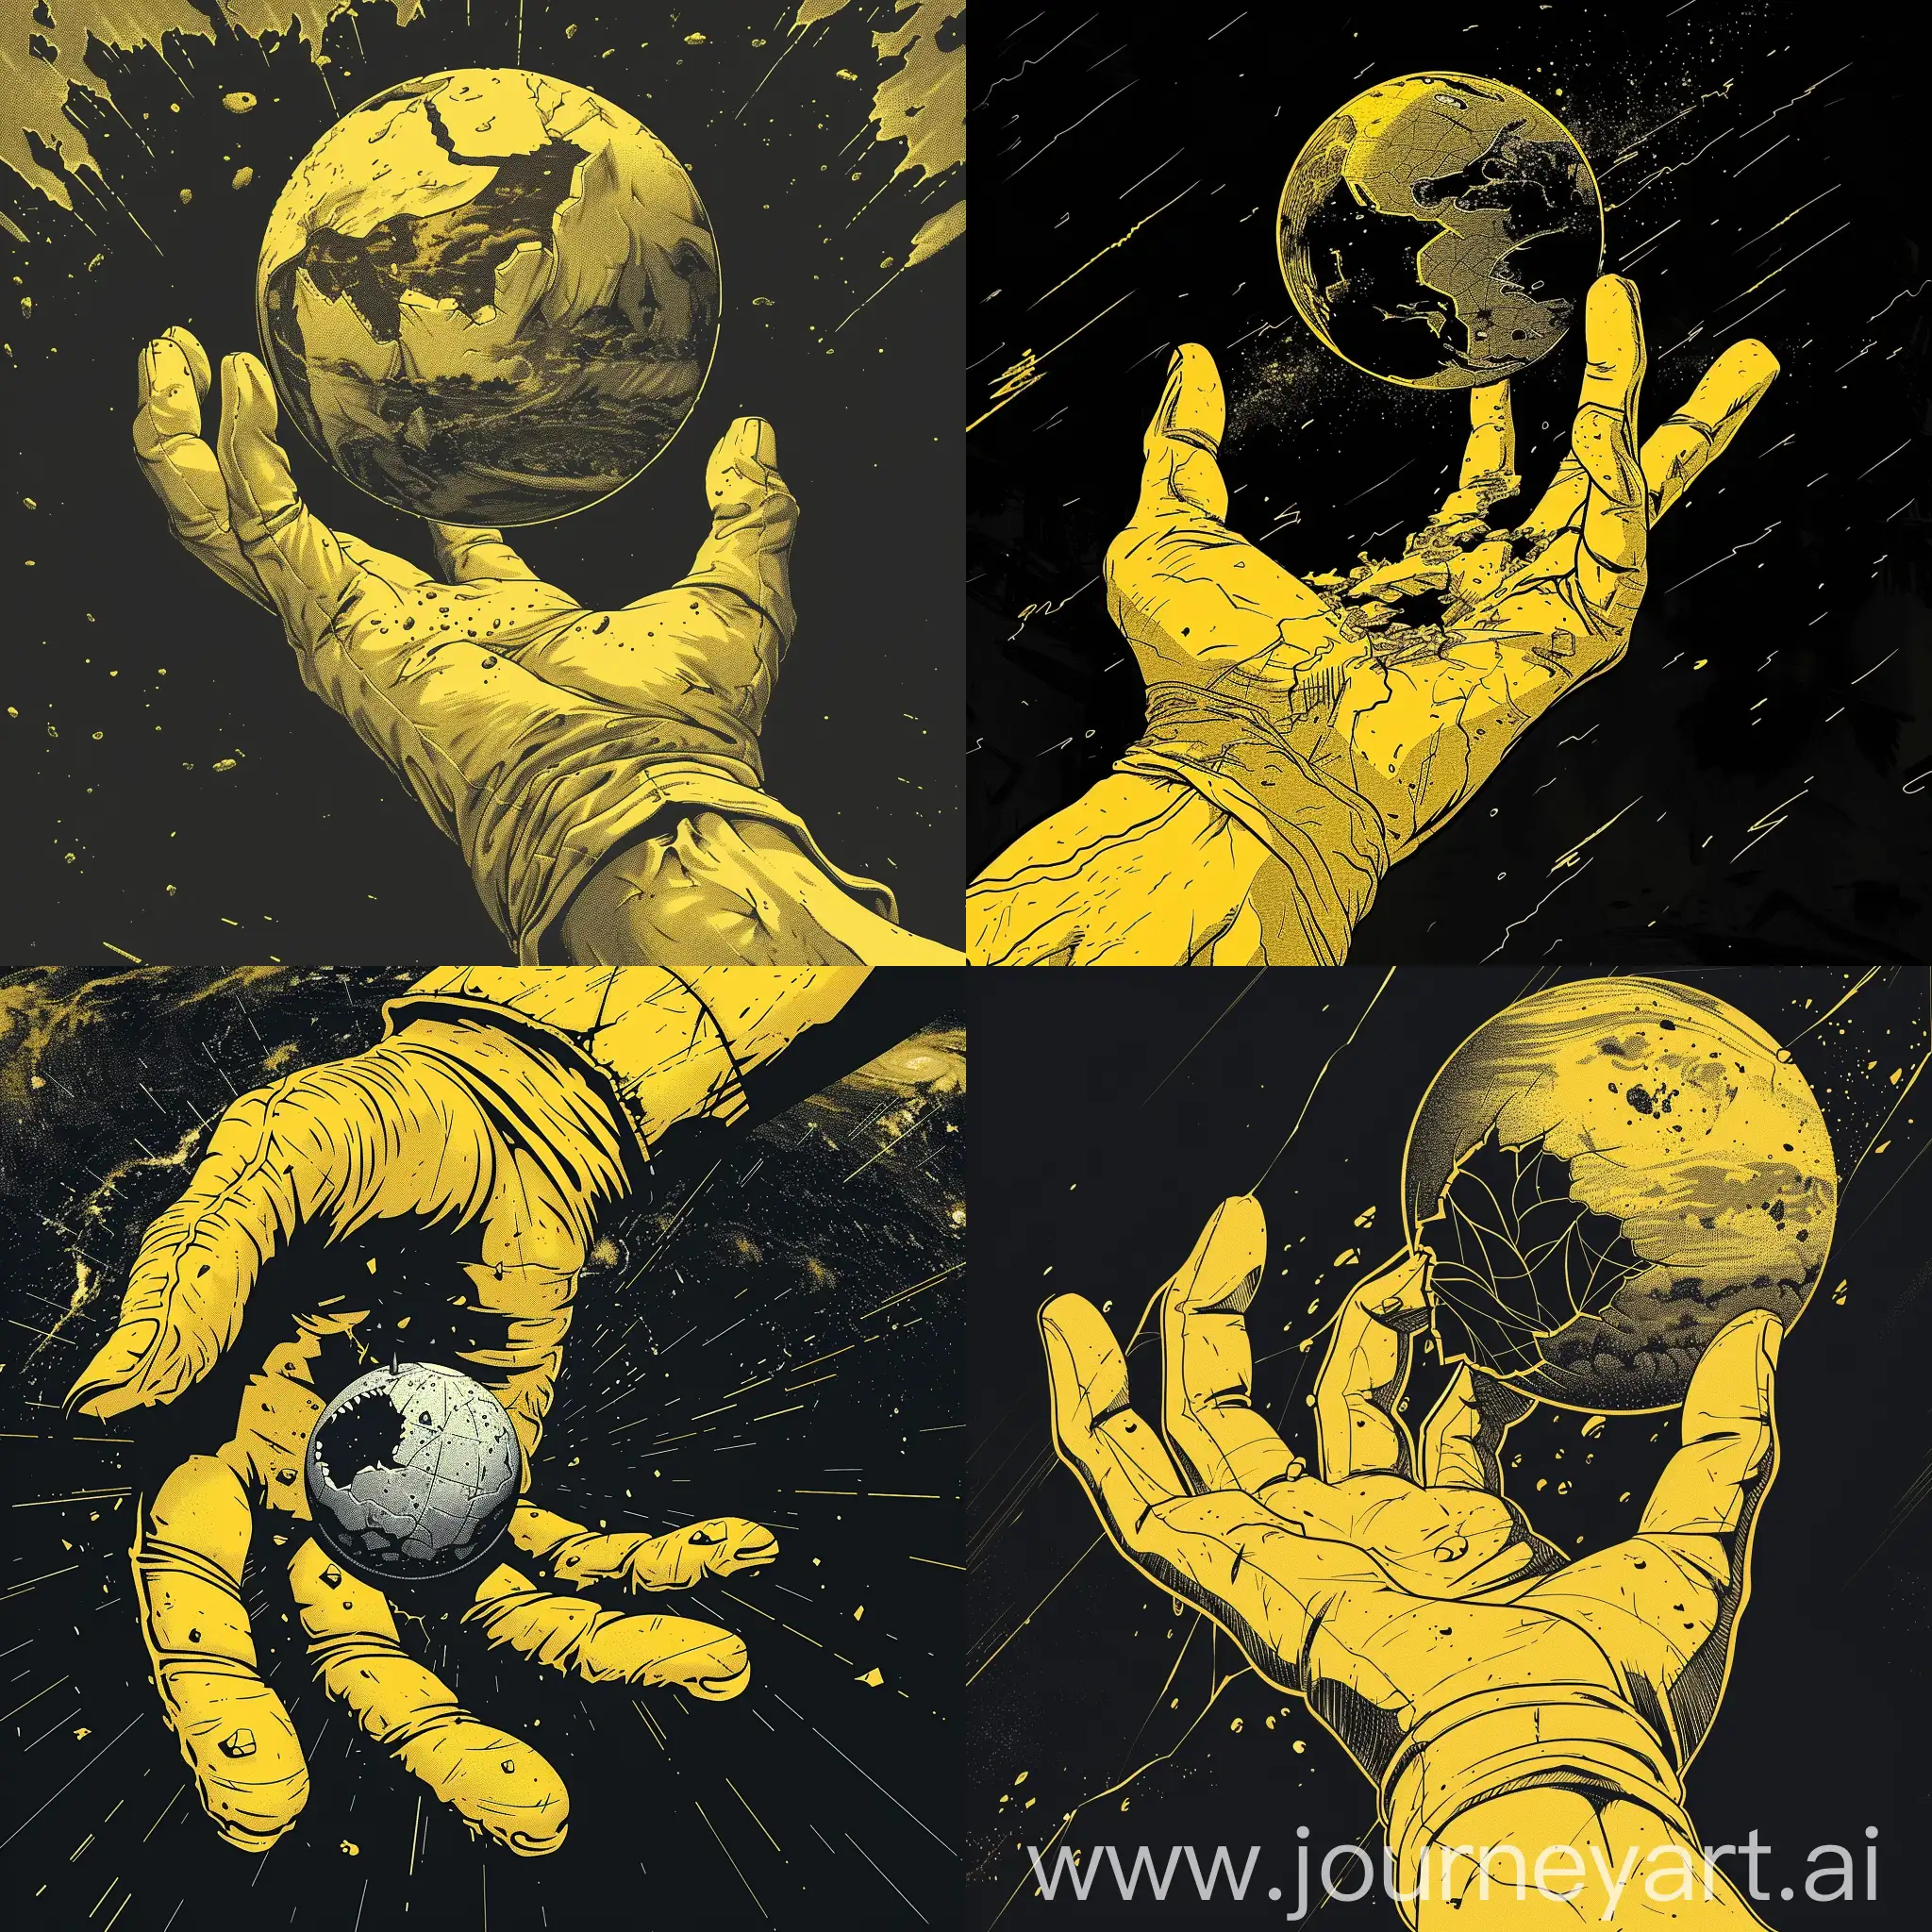  there is a huge  hand grabing a plannet tightly, in style of yellow silhouette, the planet is cracking, slender hand, epic, animation, anime, glove, claw, the planet look likes a small ball in the hand, illustration, masterpiece